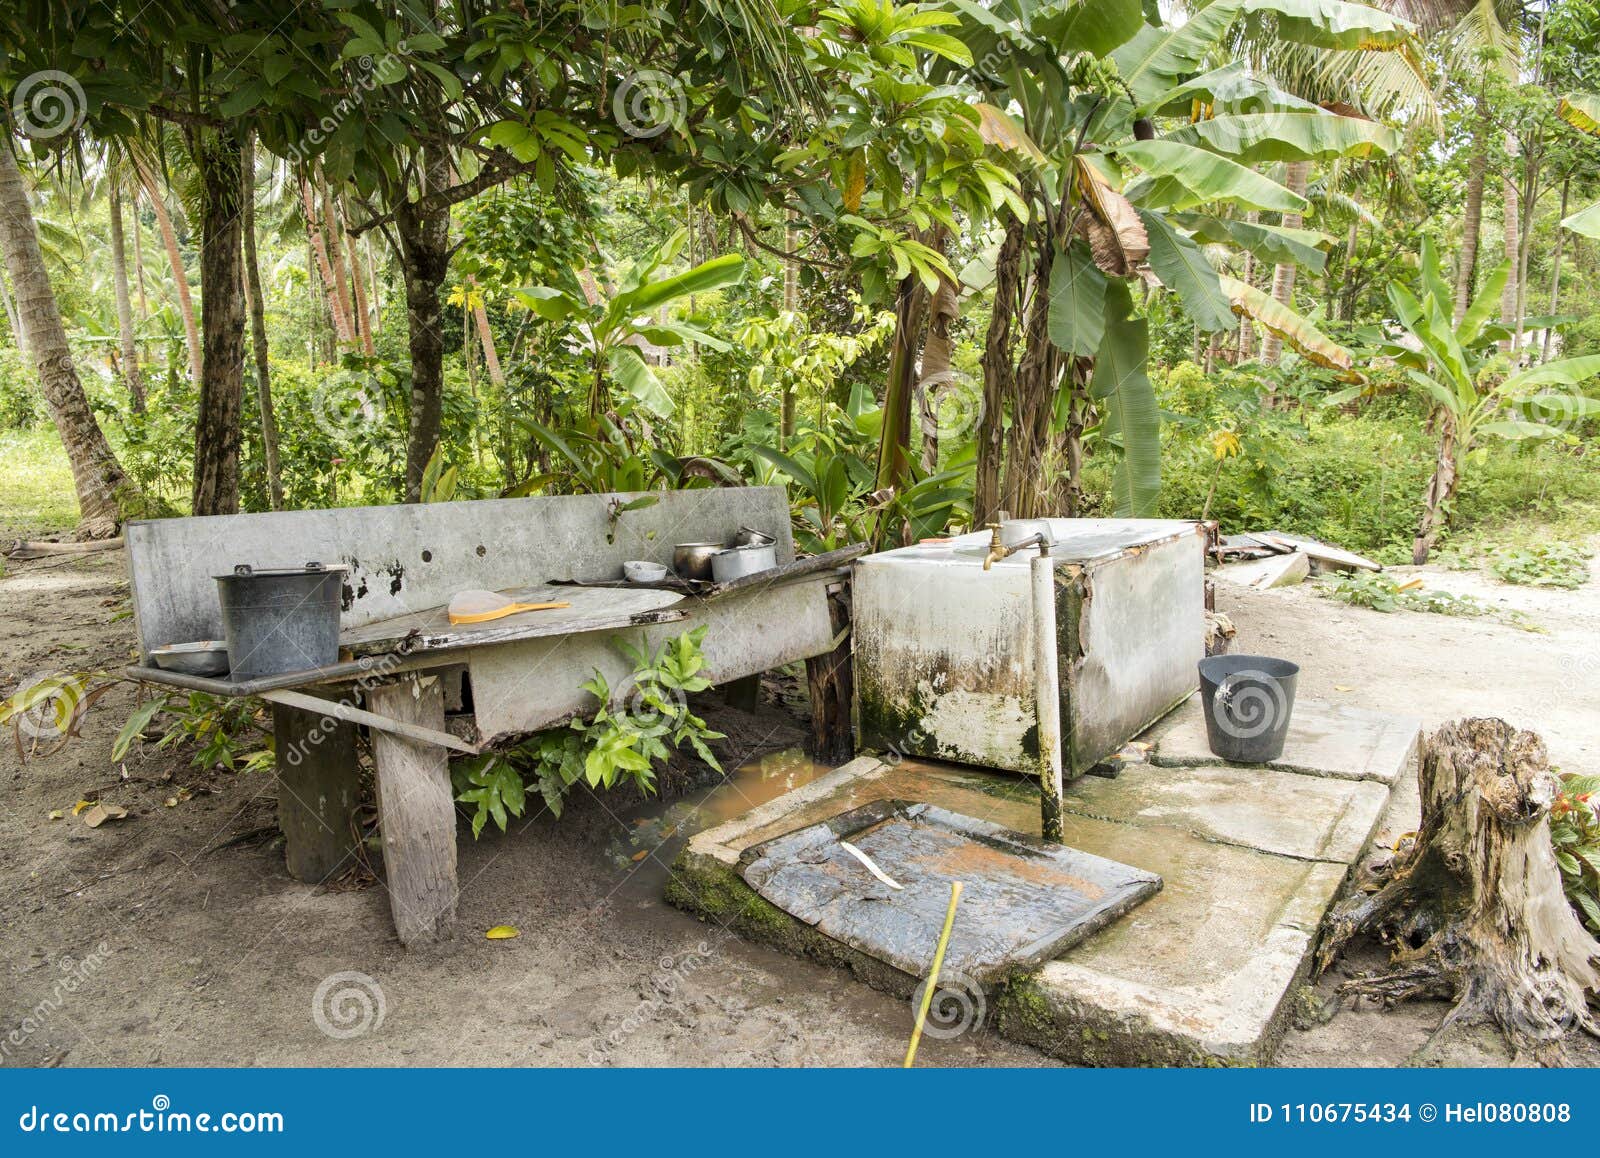 Very Simple Outdoor Kitchen At The Edge Of Rainforest